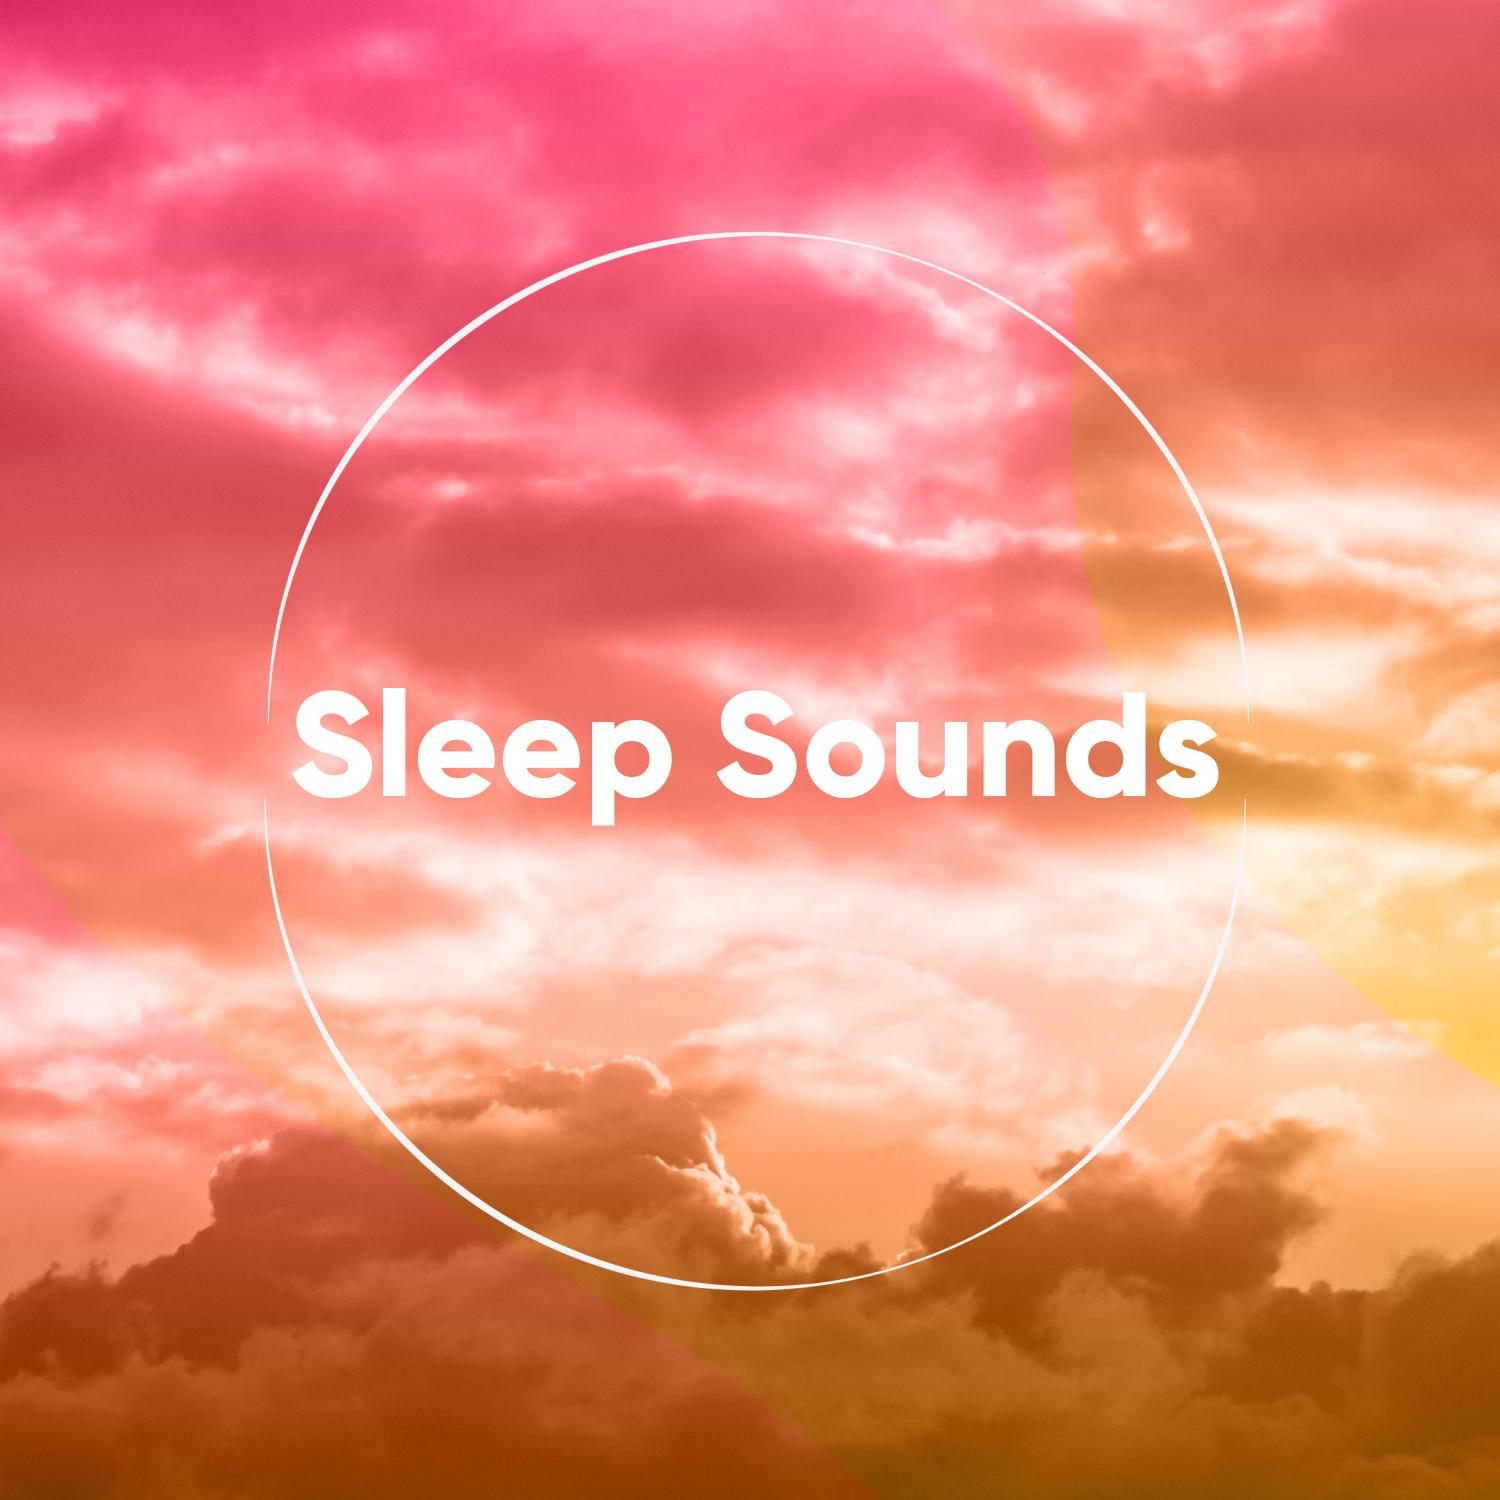 16 Sounds to Help You Sleep - Nature Sounds for a Better Night Sleep